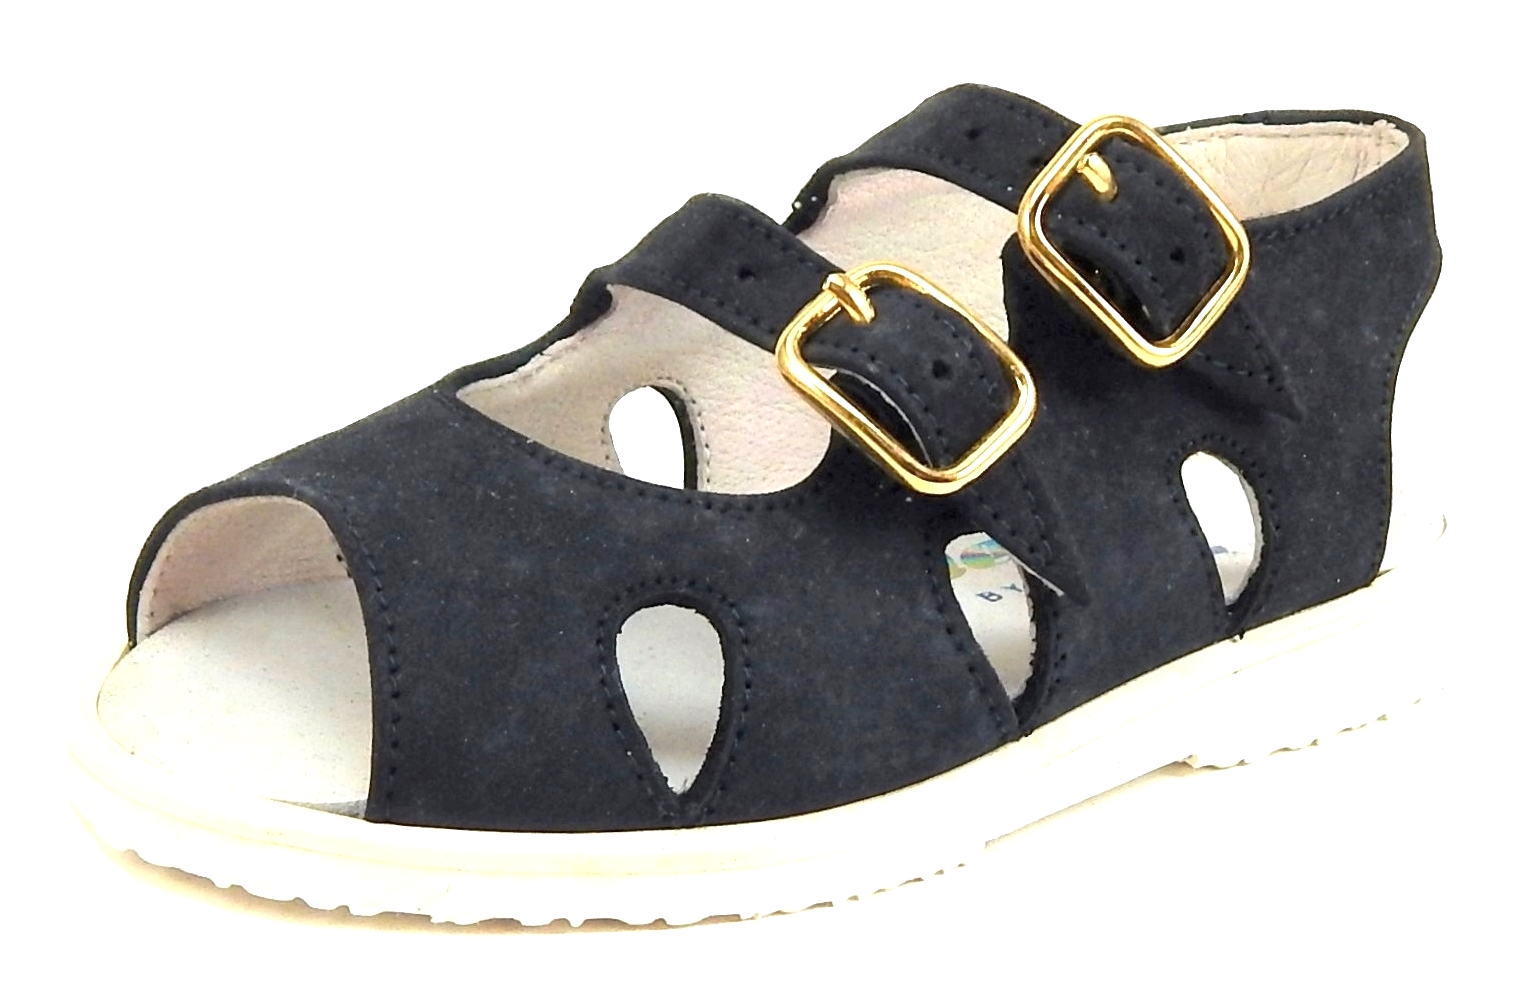 A-7083 - Navy Buckle Sandals